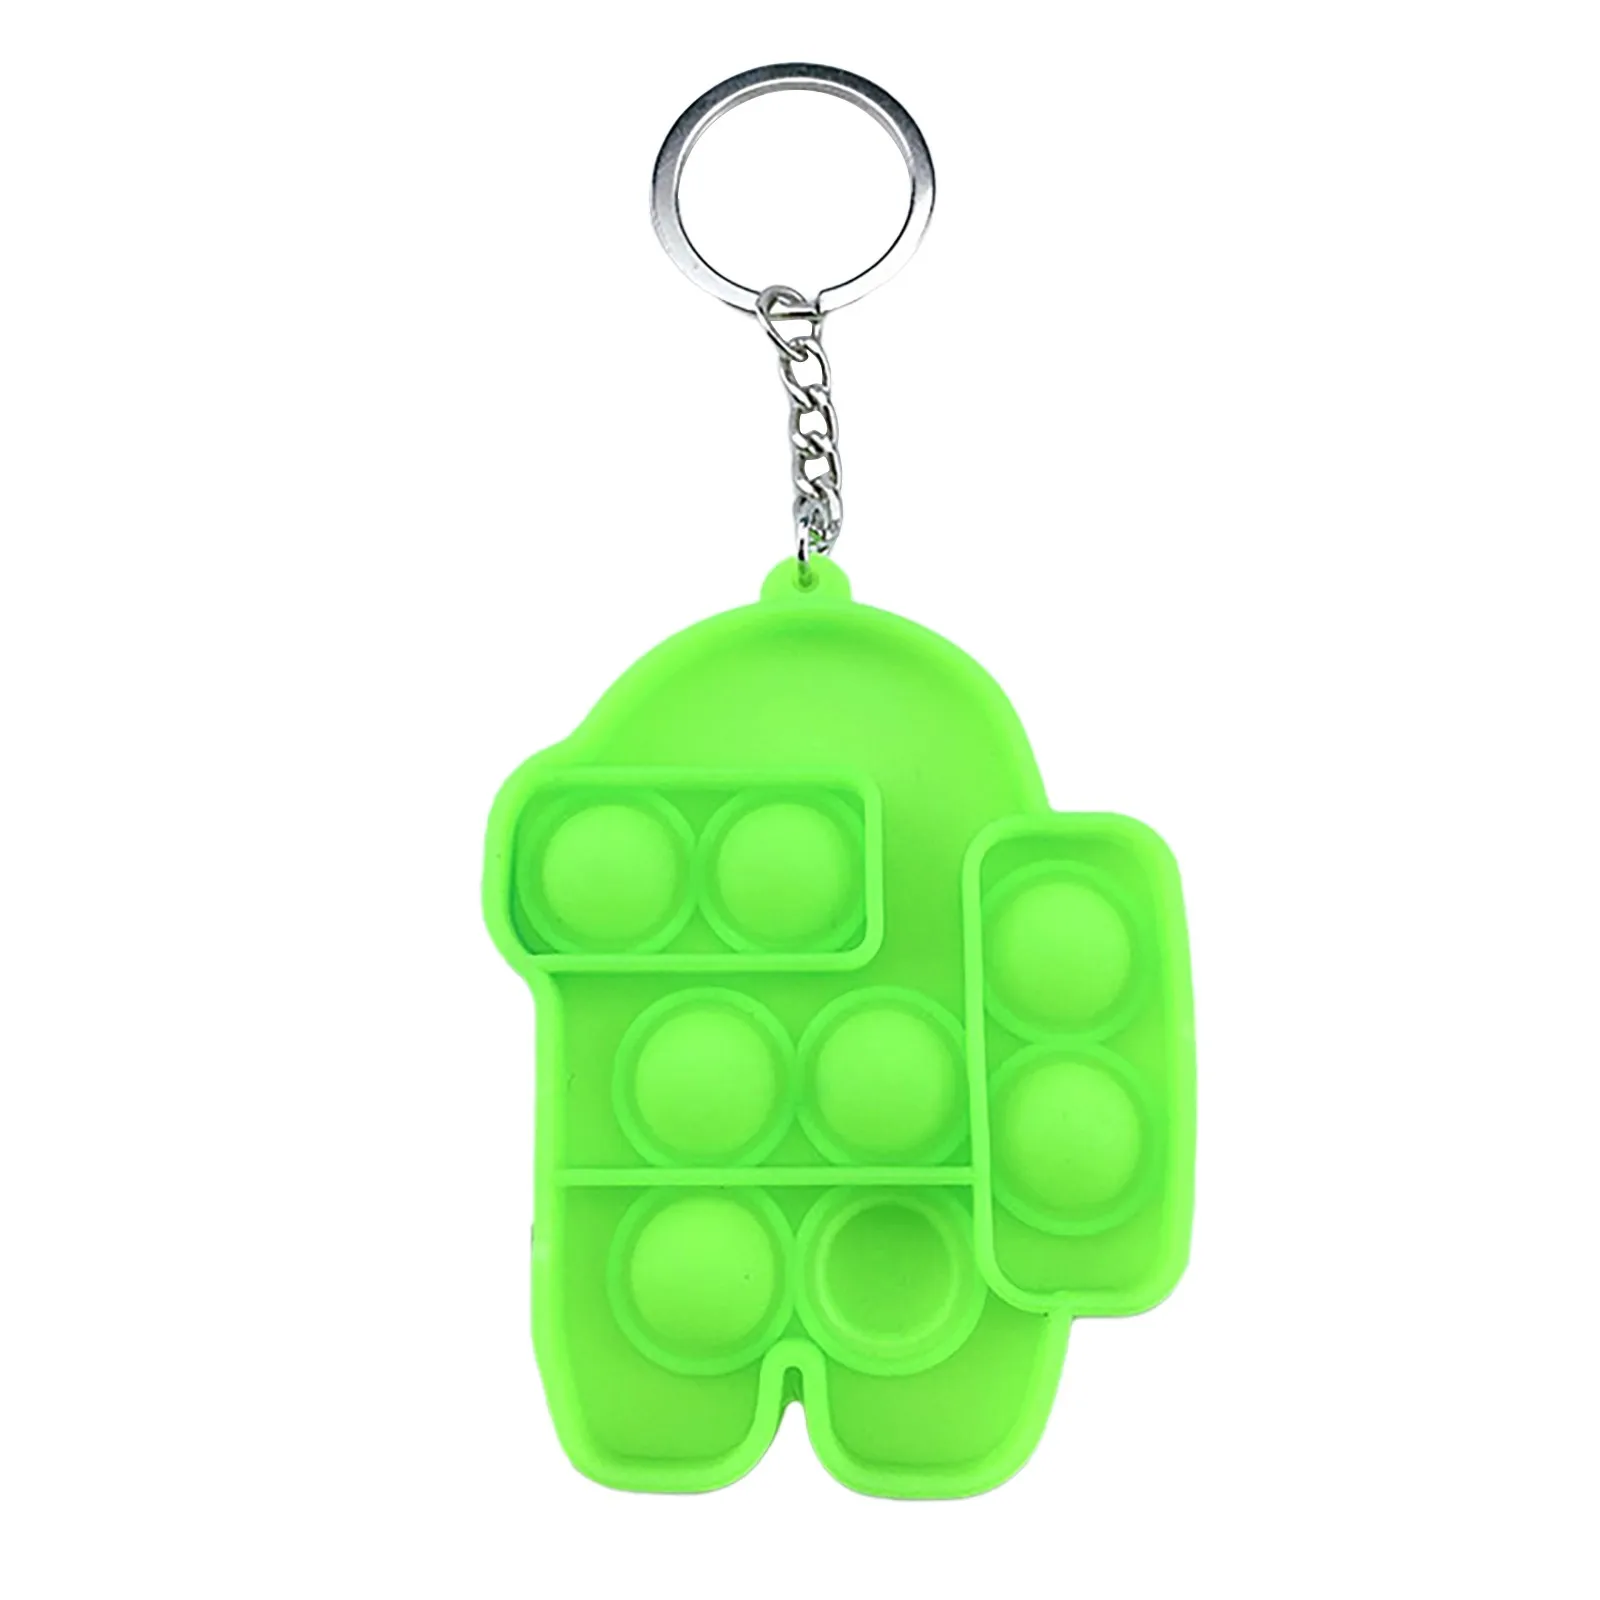 Mini Pops Fidget Toy Simple Dimple Its Anti Stress Relief Keychain Push Bubble Silicone Anxiety Sensory For Autism Adhd Chidlren stress ball brain